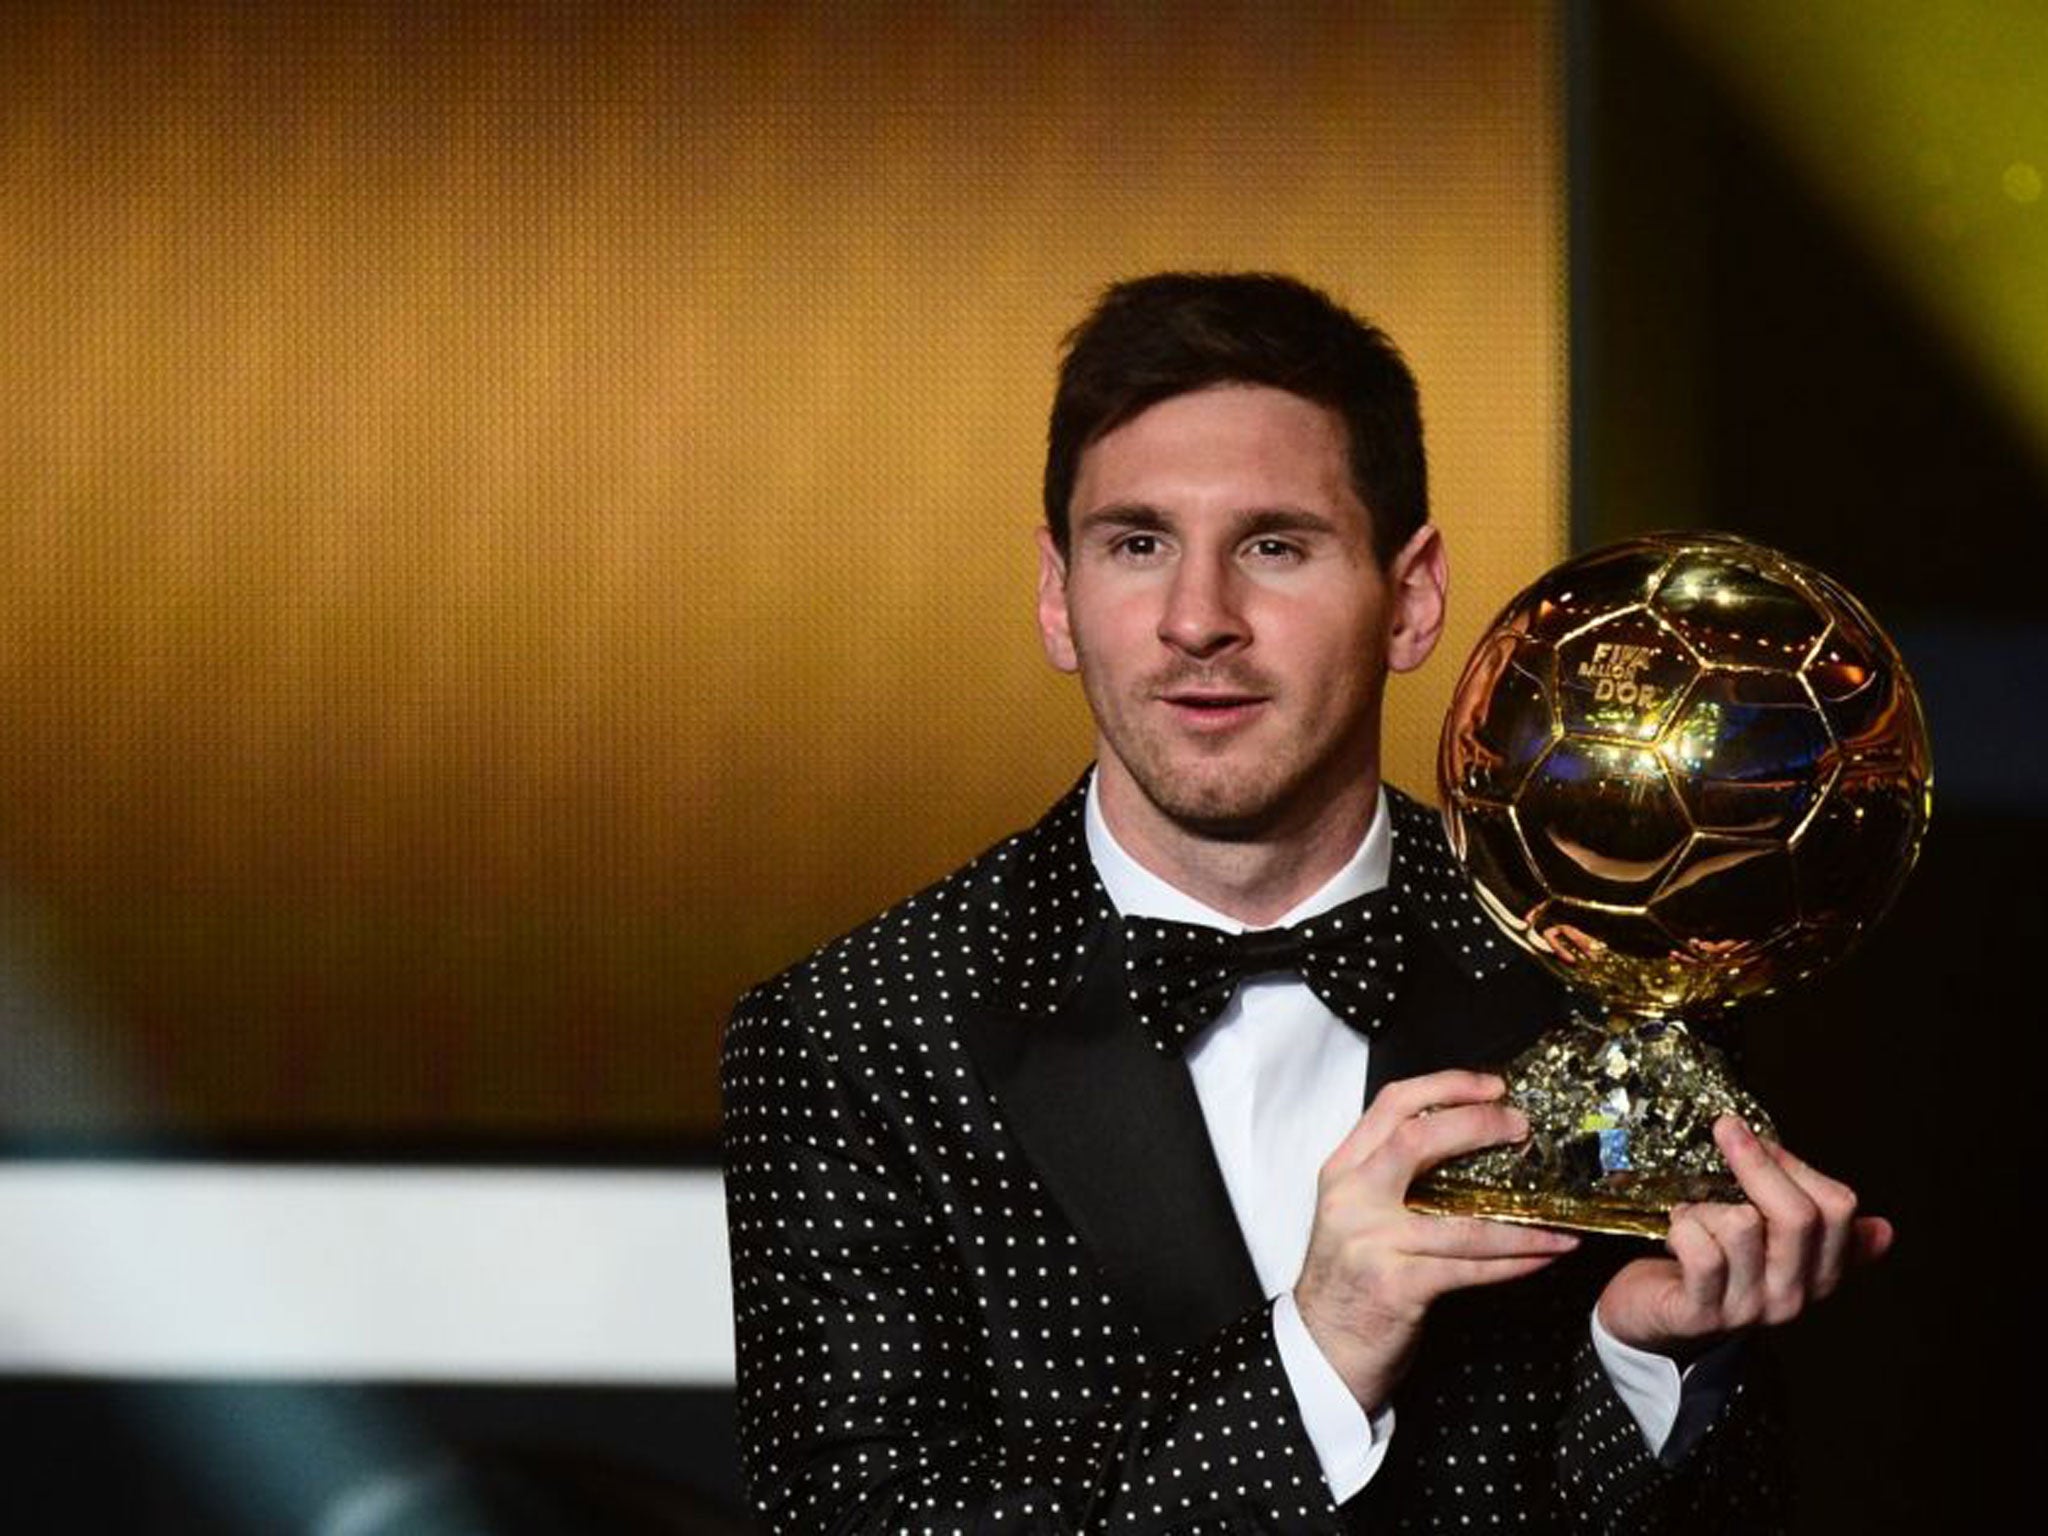 Barcelona's Lionel Messi becomes most decorated player in history after winning unprecedented fourth straight Ballon d'Or